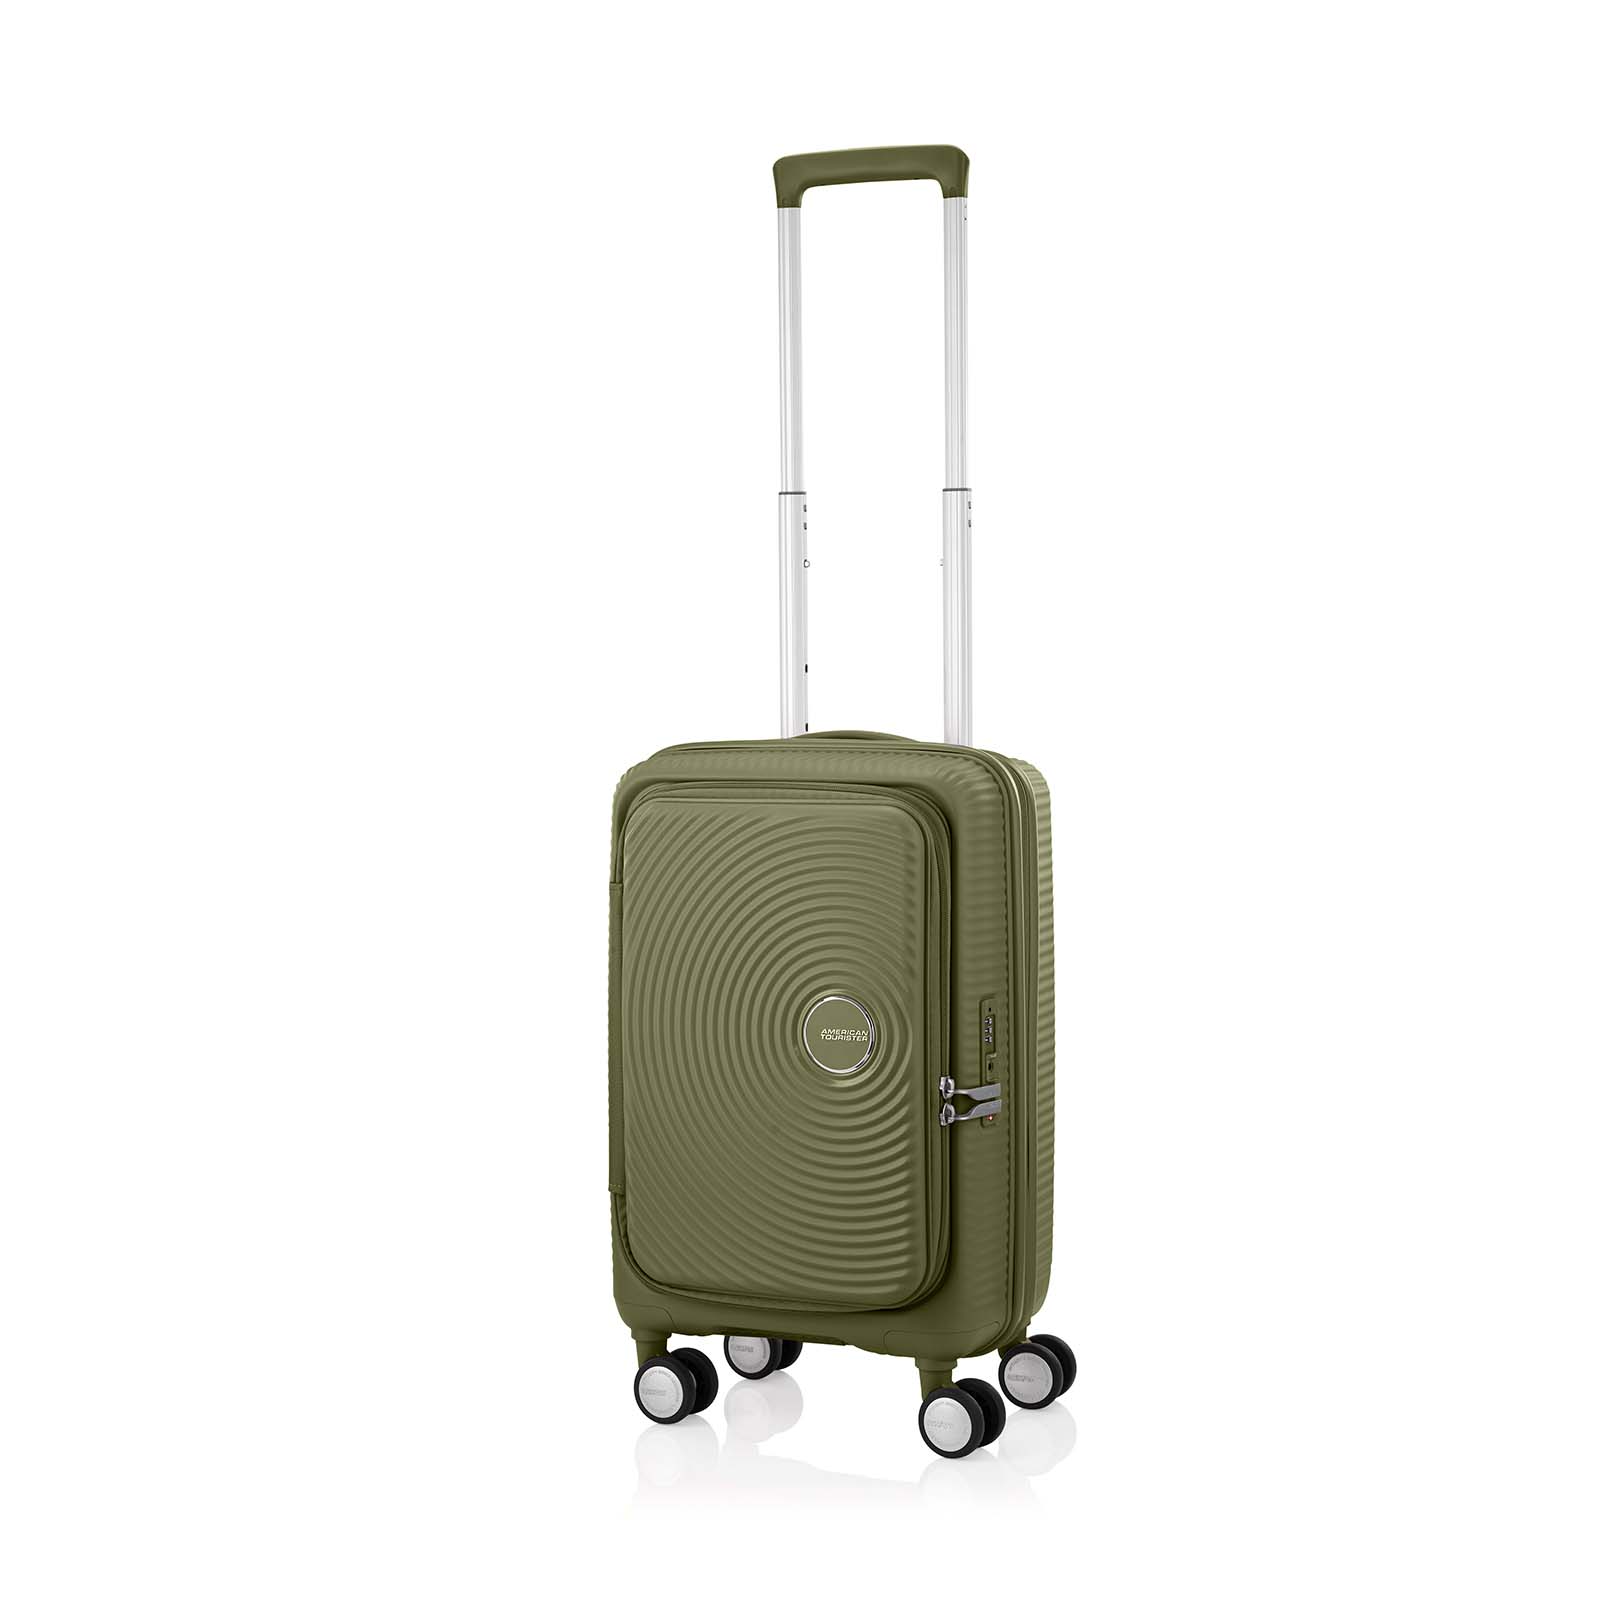 American-Tourister-Curio-Book-Opening-55cm-Carry-On-Suitcase-Khaki-Angle